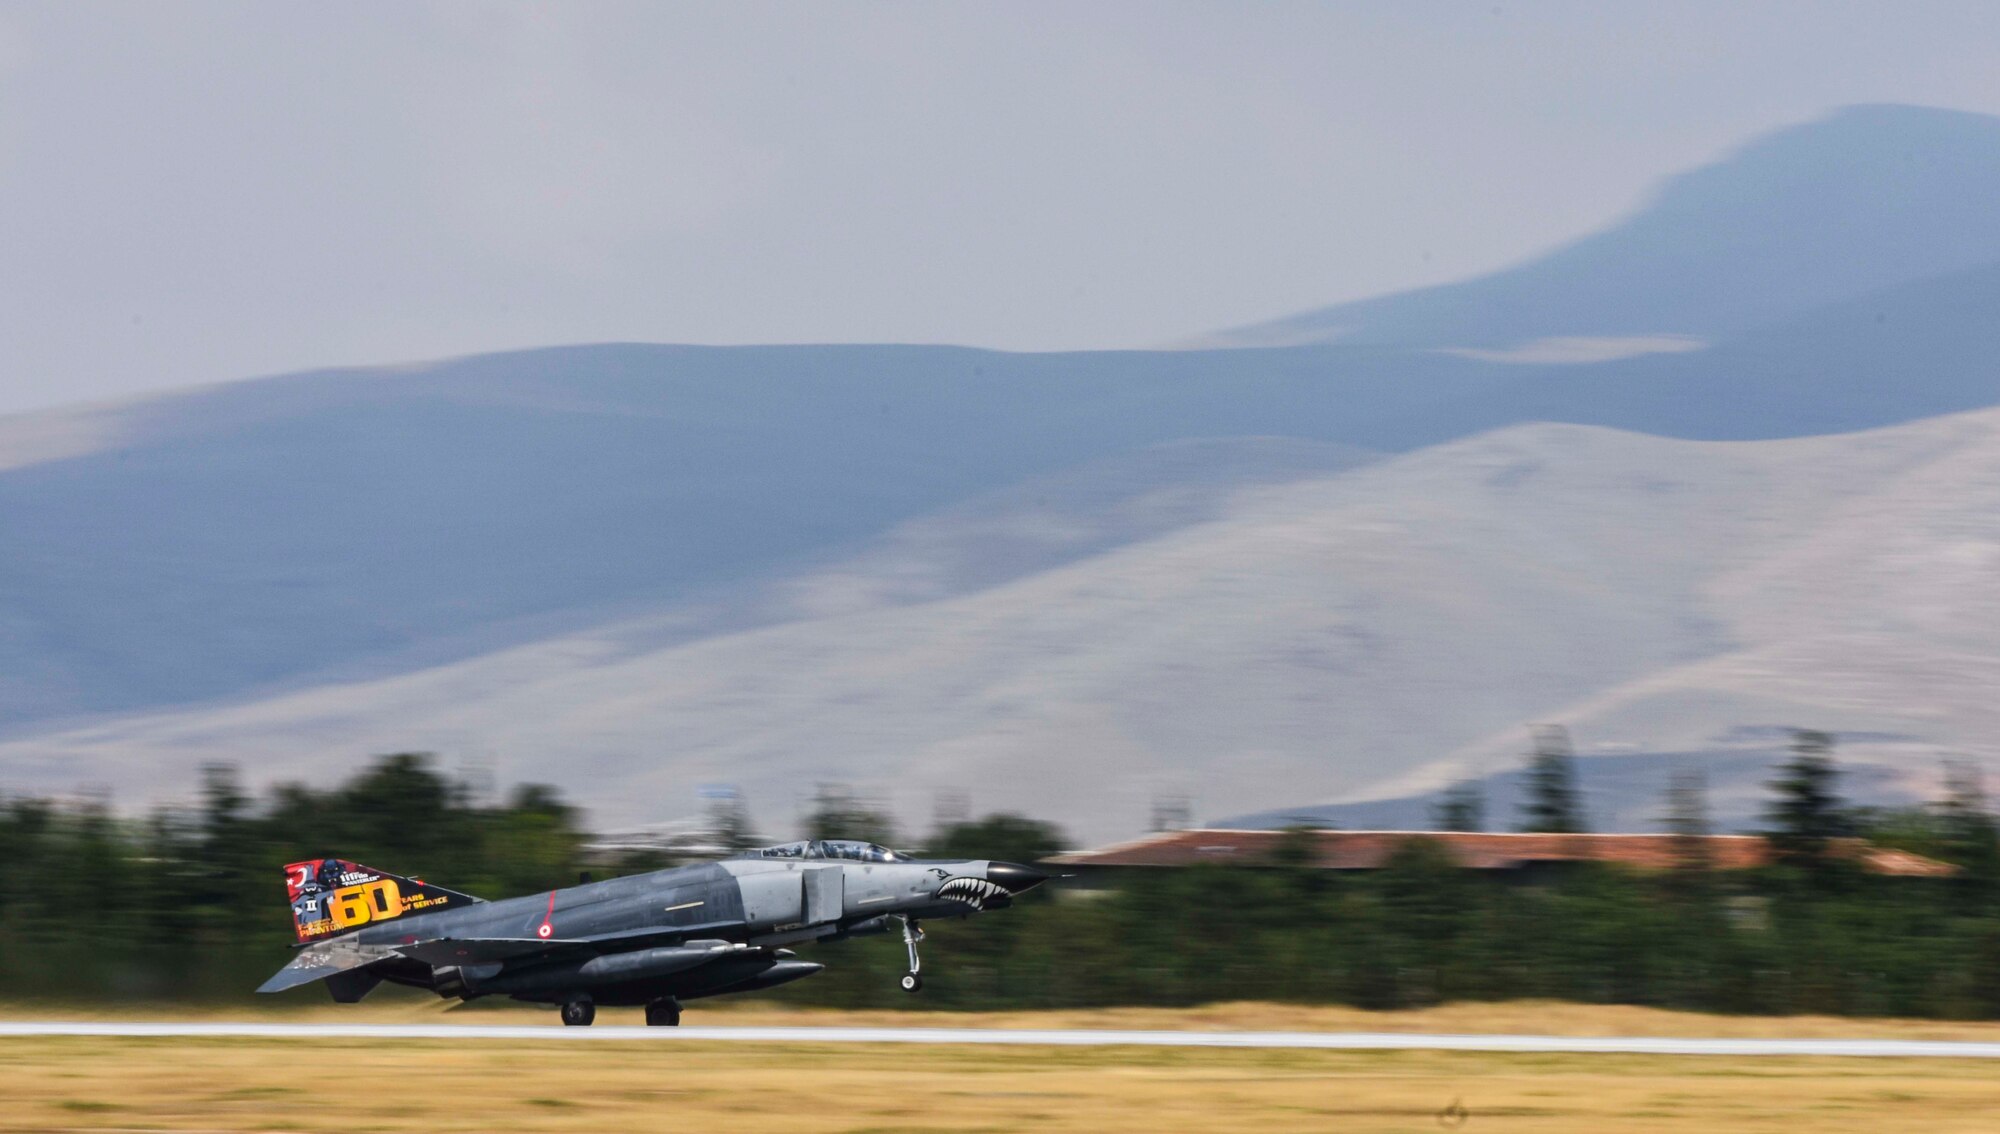 A Turkish F-4 Phantom takes off, during Exercise Anatolian Eagle June 17, 2019, from the Third Main Jet Base, Konya, Turkey. Participants in the exercise played offensive and defensive roles for the purpose of sharpening aerial warfare skills and bolstering international cooperation for military operations. (U.S. Air Force photo by Senior Airman Joshua Magbanua)